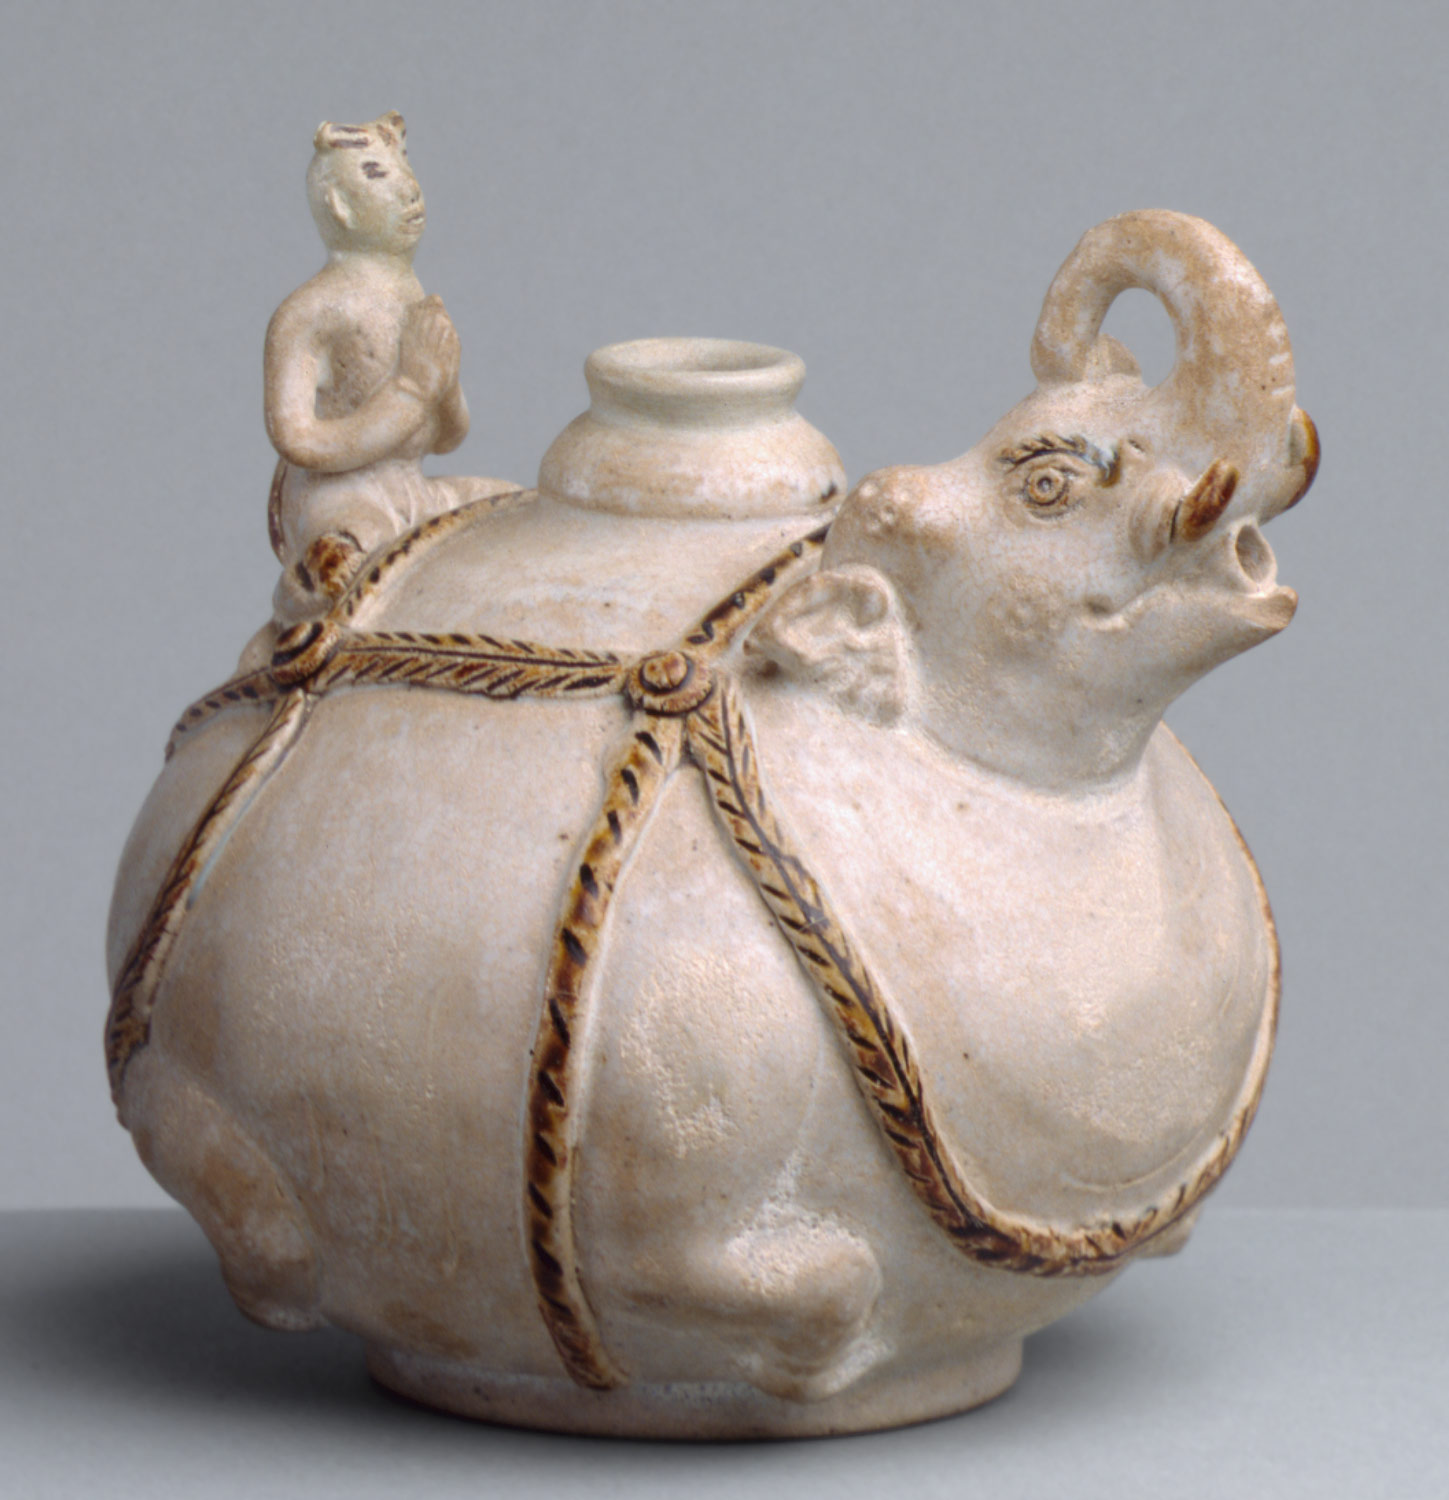 Vessel in the form of an elephant and rider